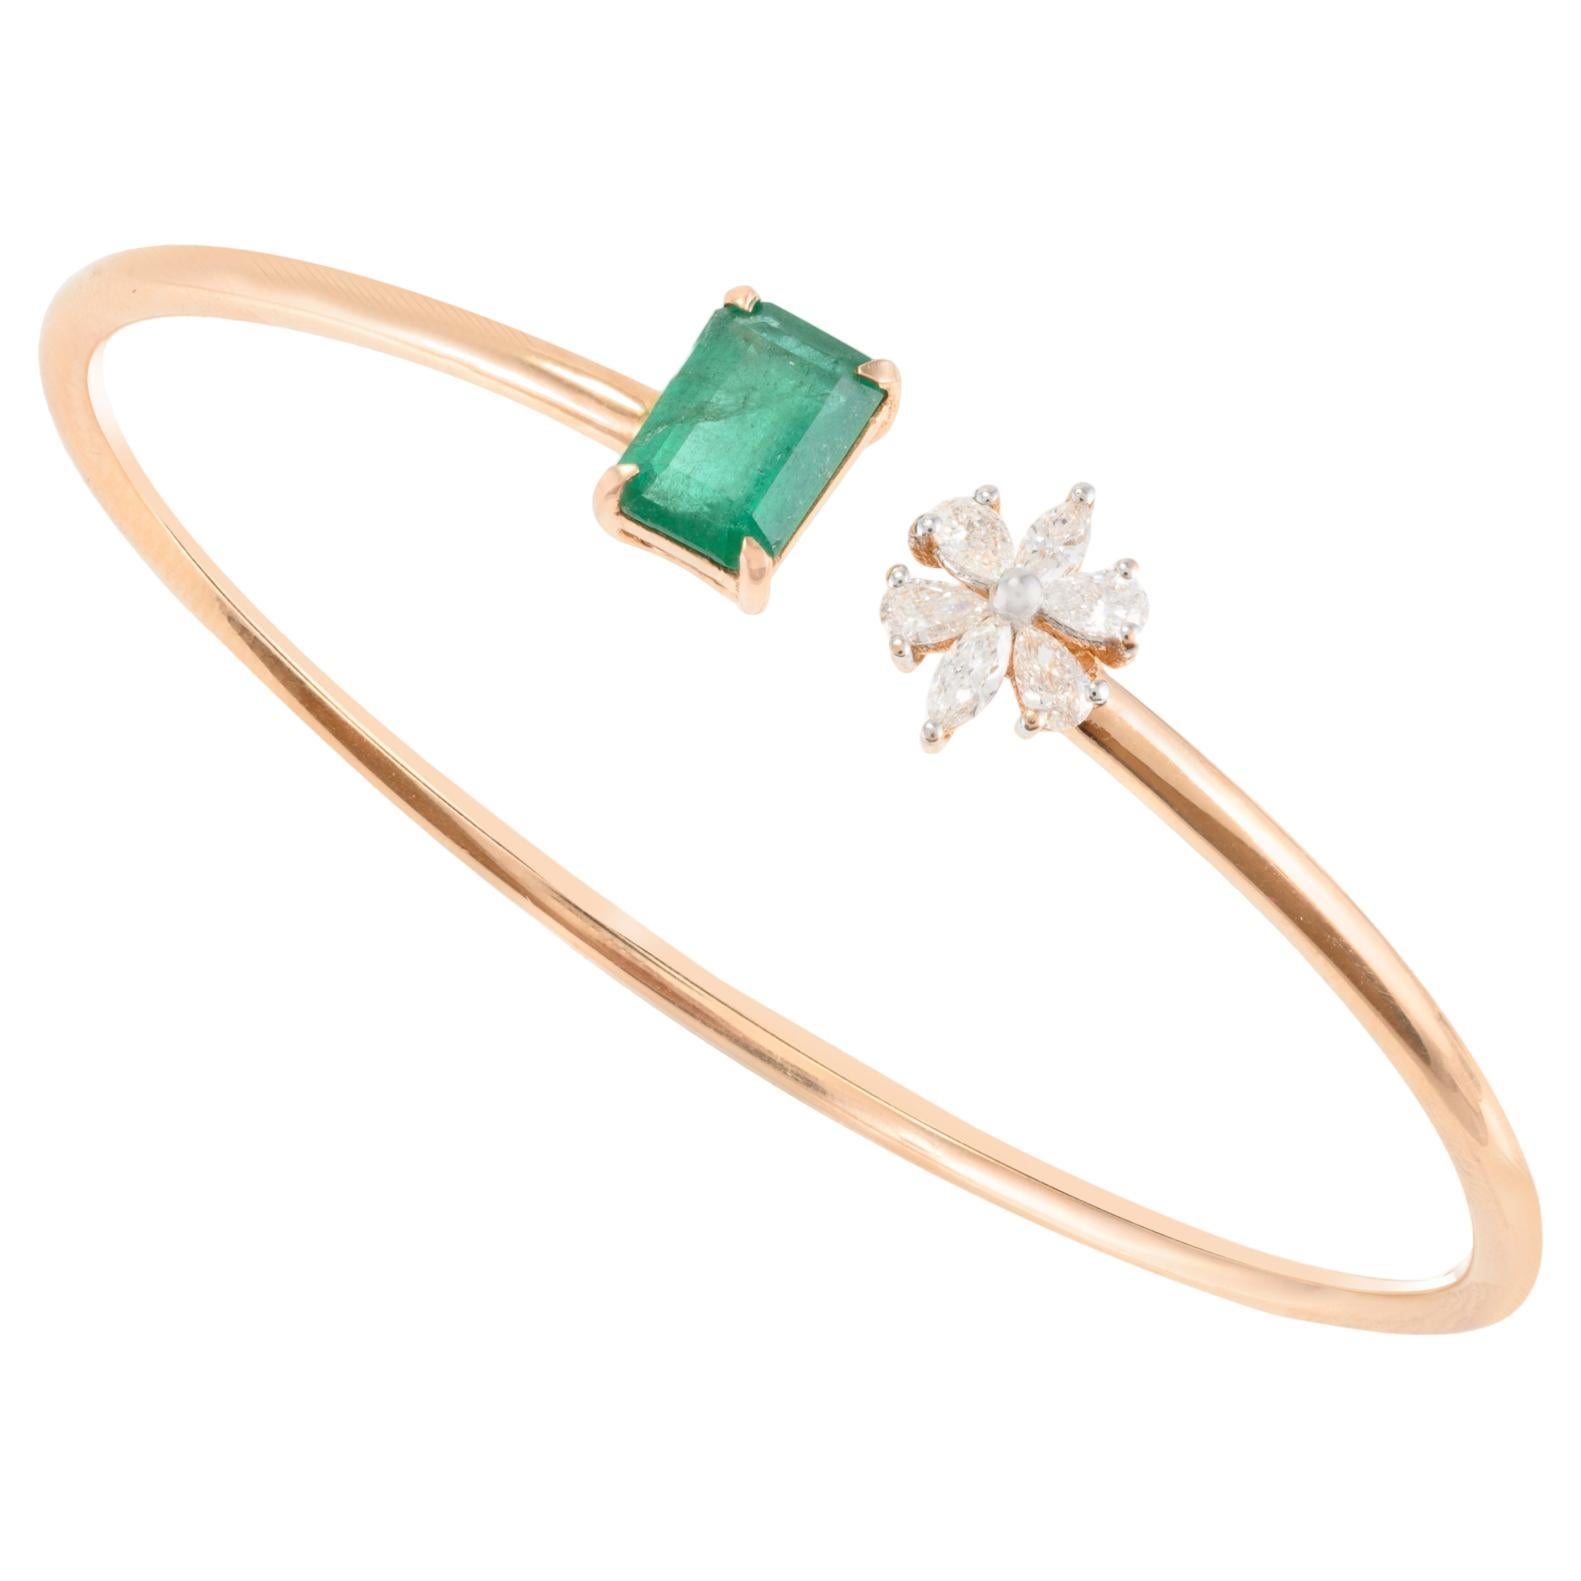 Genuine Emerald and Diamond Flower Cuff Bracelet in 18k Rose Gold for Her For Sale